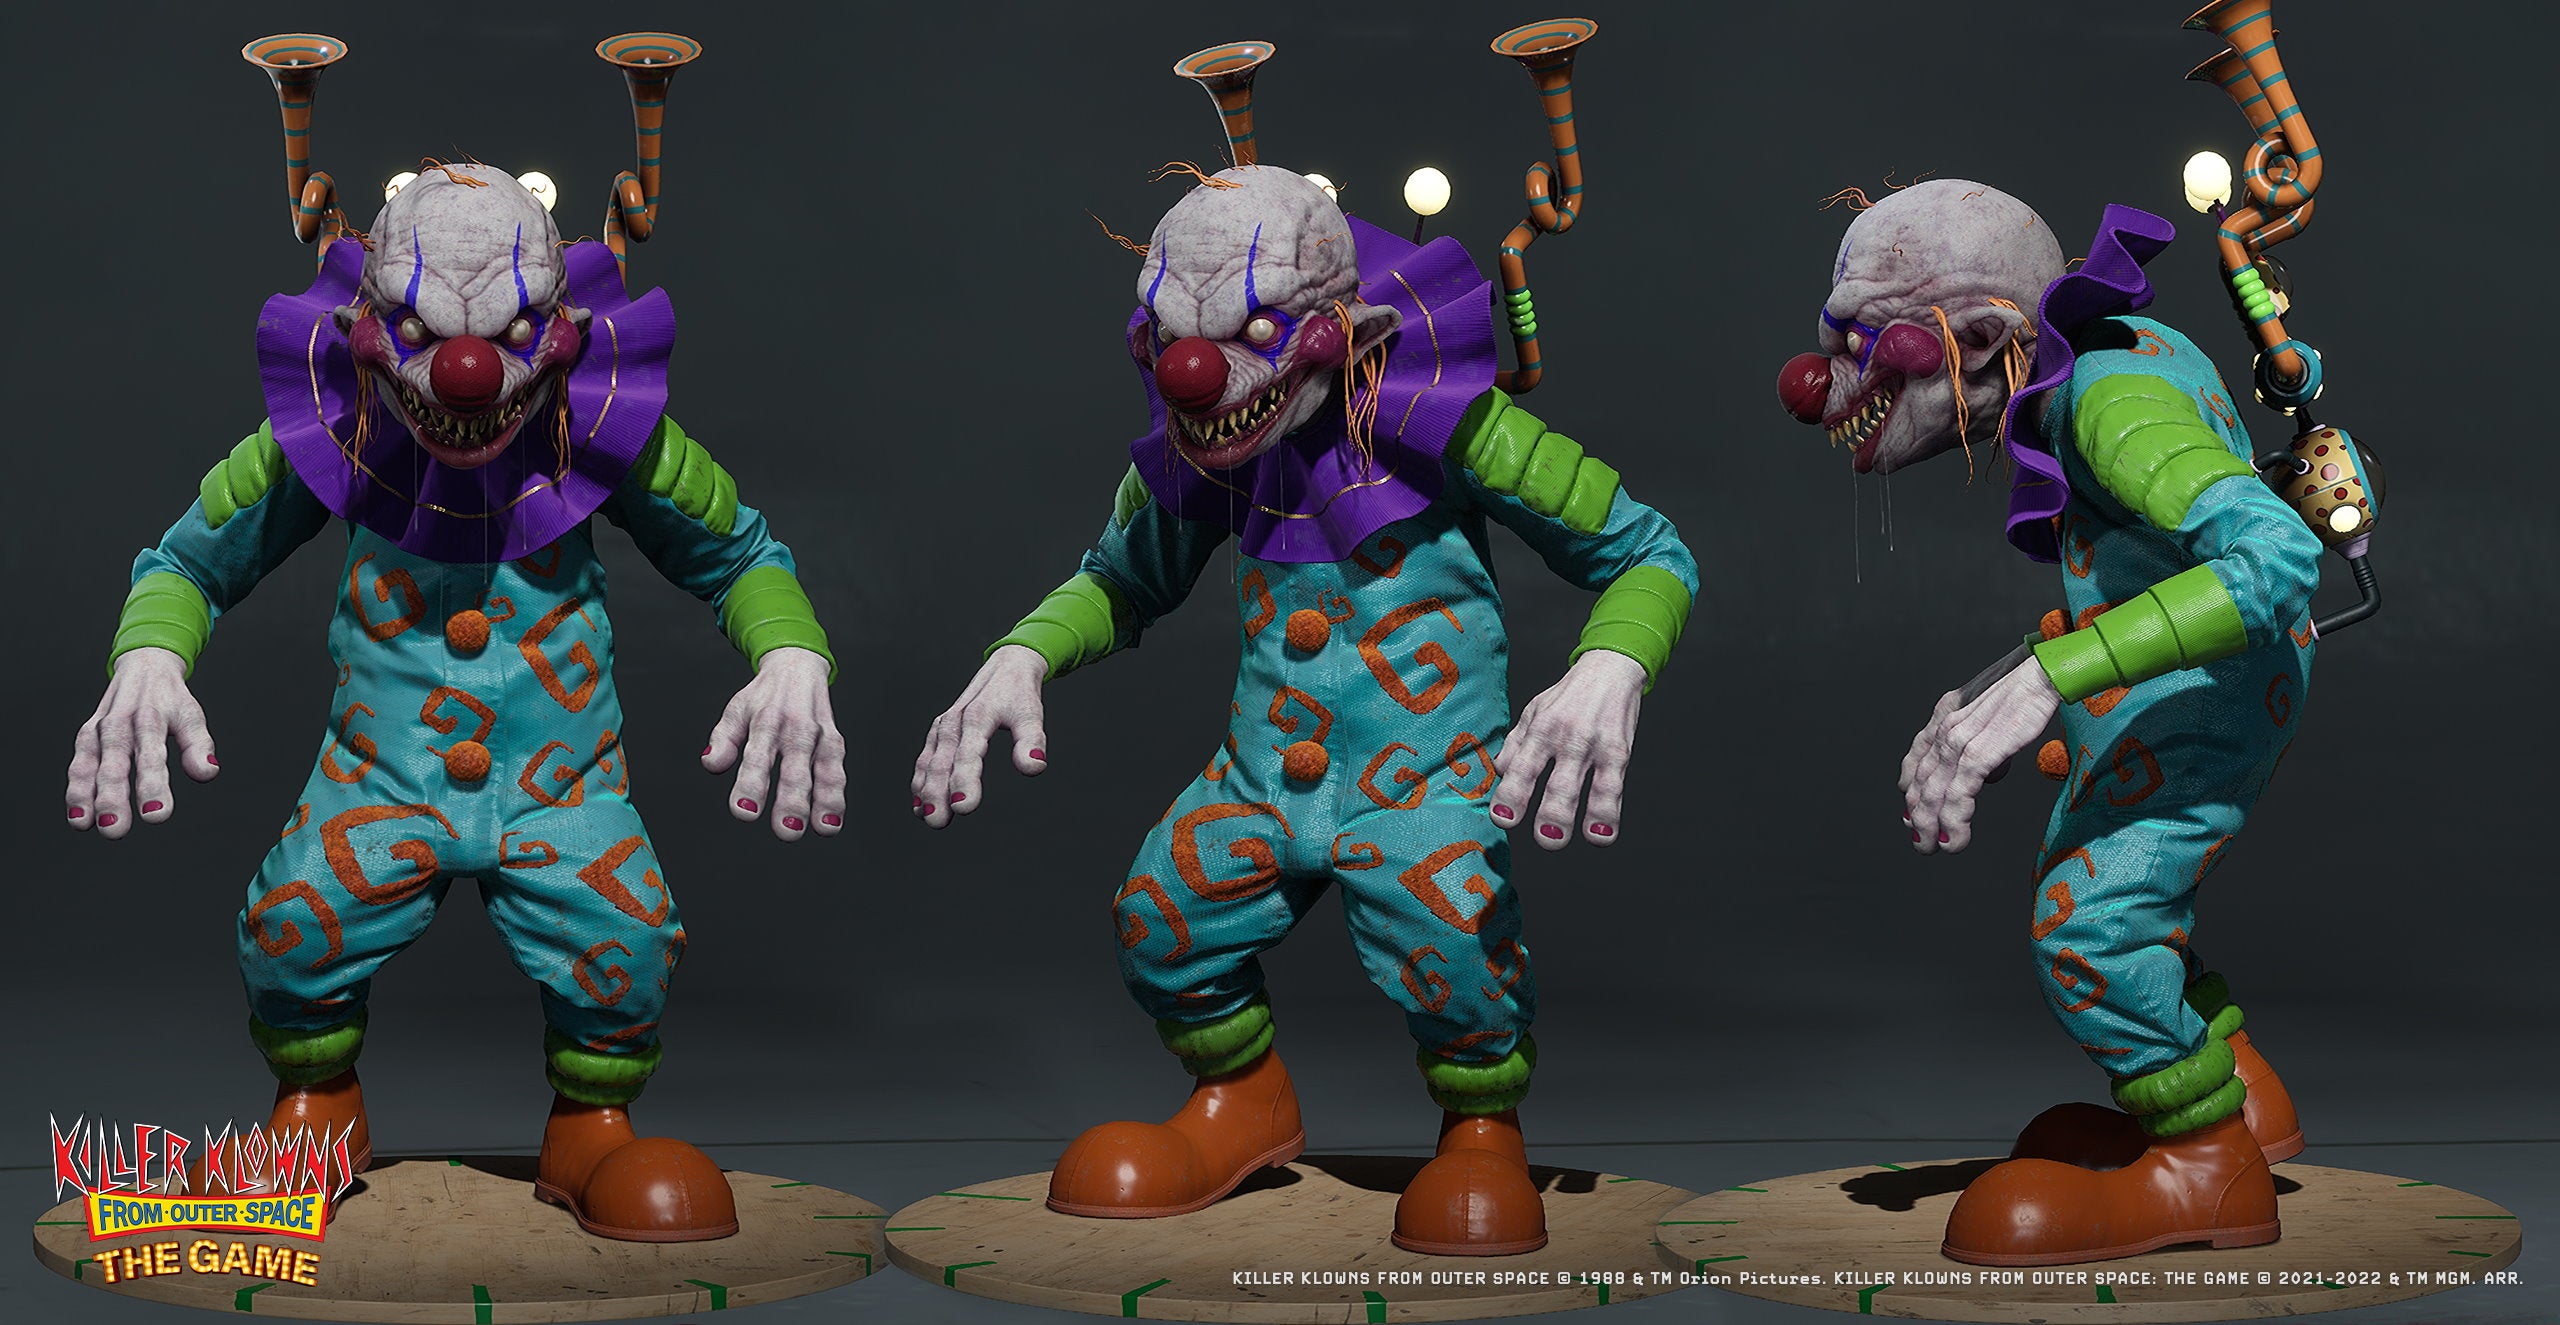 Concept art of a weird looking clown from Killer Klowns From Outer Space The Game